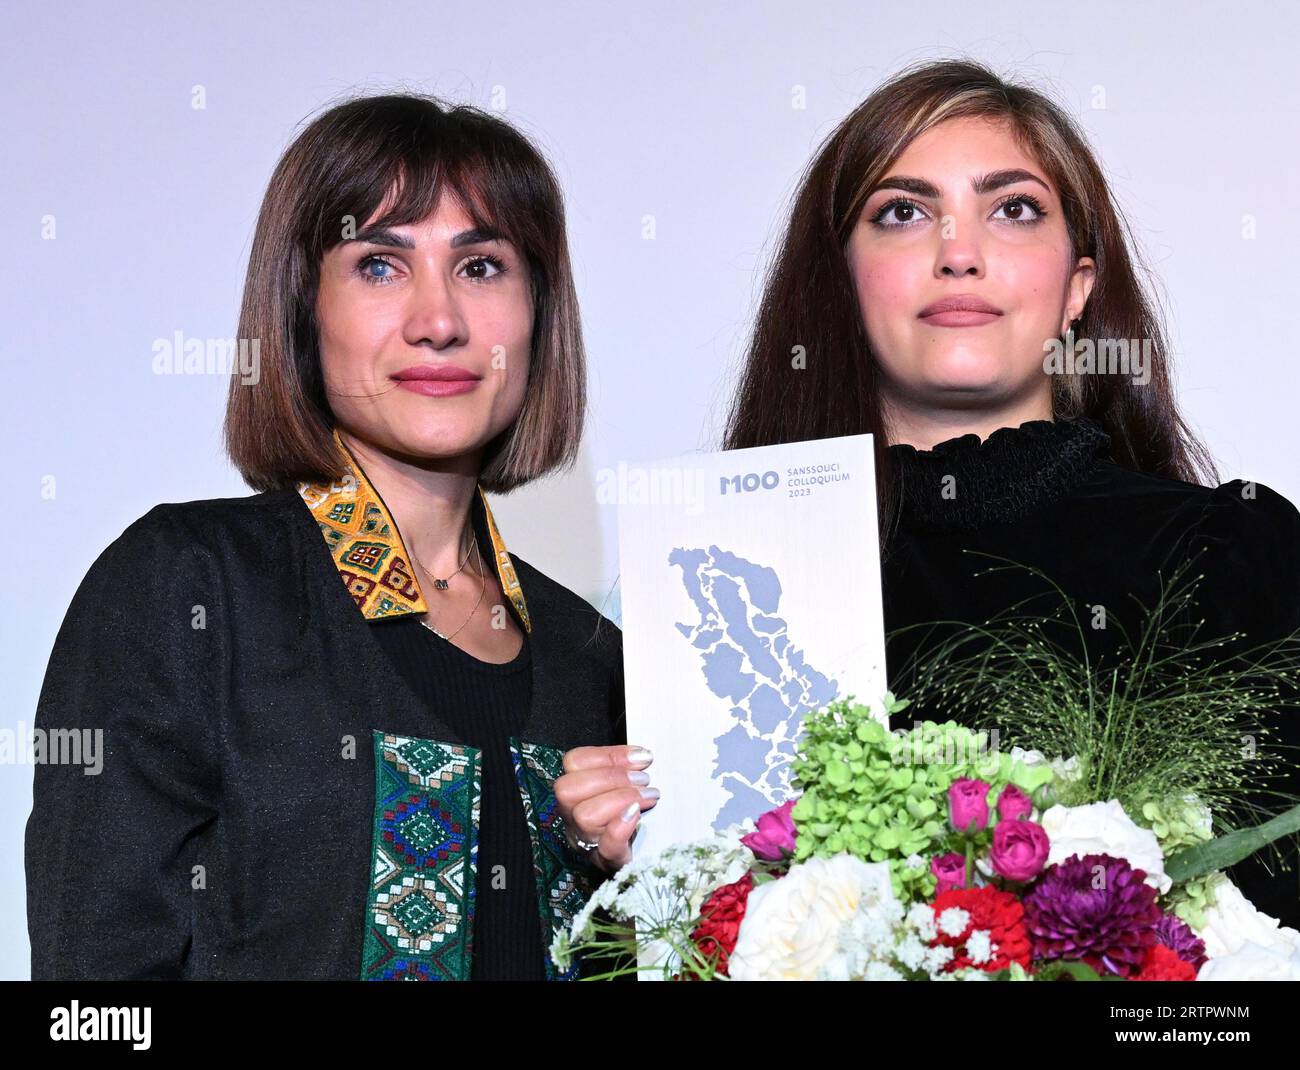 Potsdam, Germany. 14th Sep, 2023. Mersedeh Shahinkar (l), Iranian activist, and Shima Babaei (m), Iranian women's rights activist, are happy about the award after receiving the M100 Media Award. The Iranians accept the award on behalf of the Iranian 'Women, Life, Freedom' movement. The M100 Media Award has been presented since 2005 as part of the international media conference M100 Sanssouci Colloquium. Credit: Soeren Stache/dpa/Alamy Live News Stock Photo